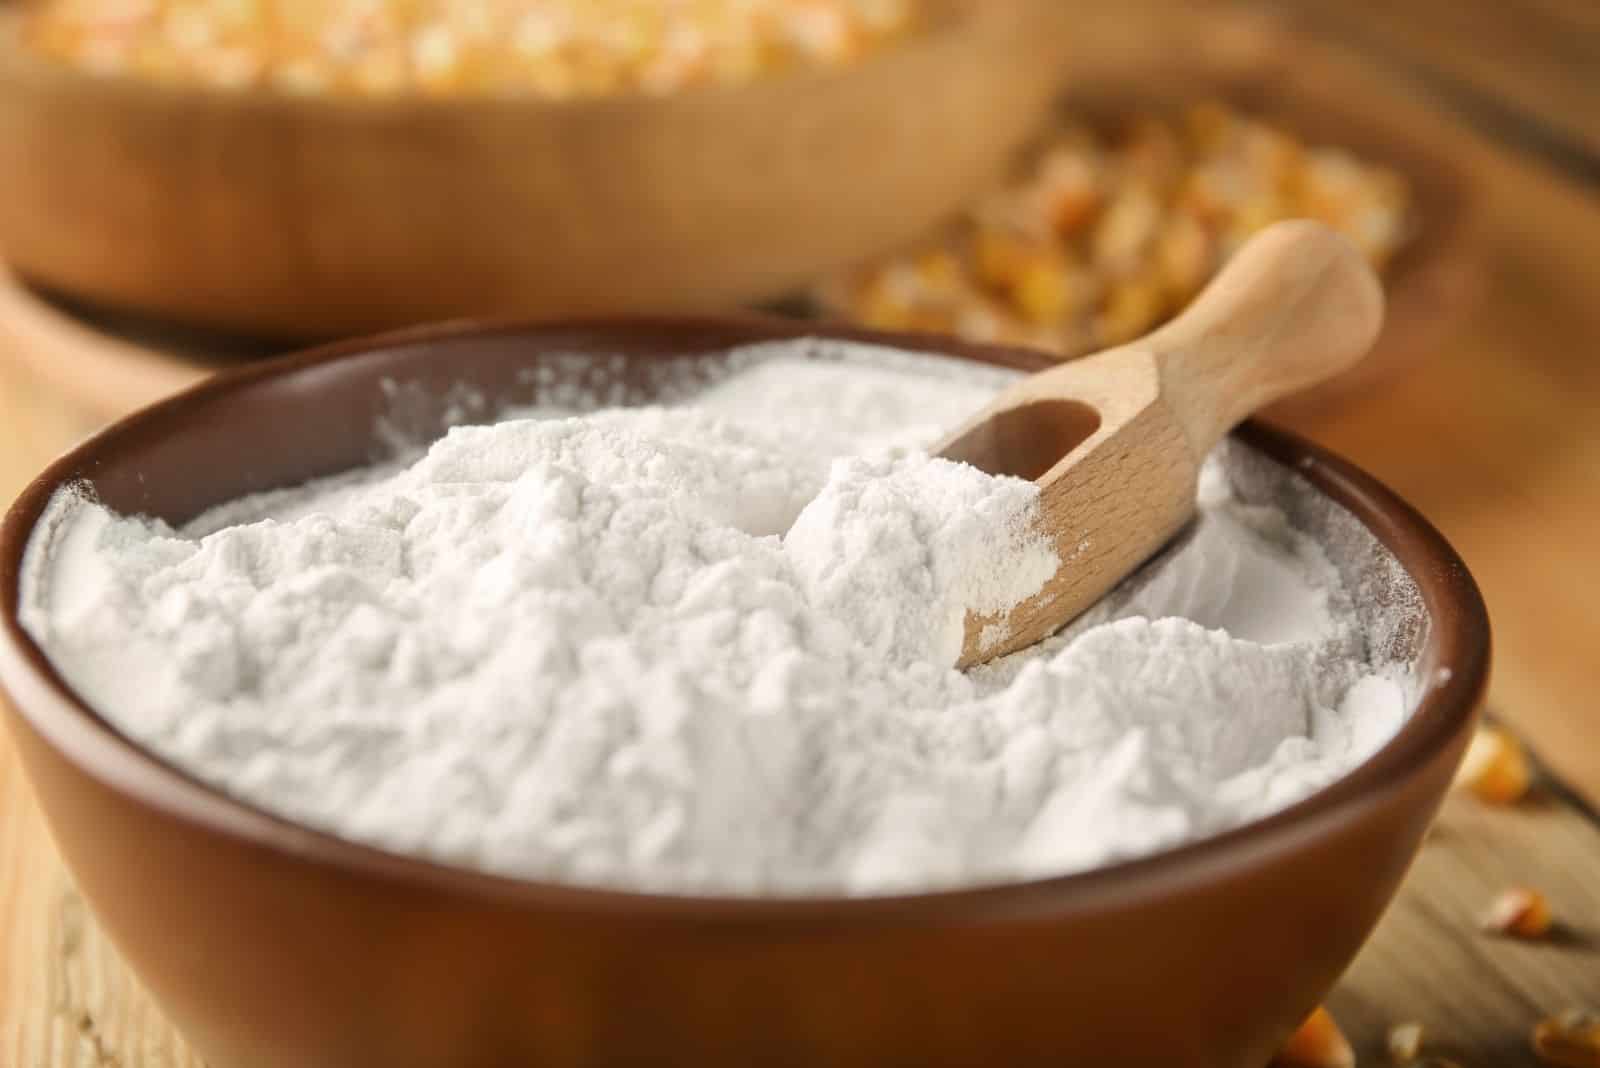 cornstarch on bowl with corn in the background